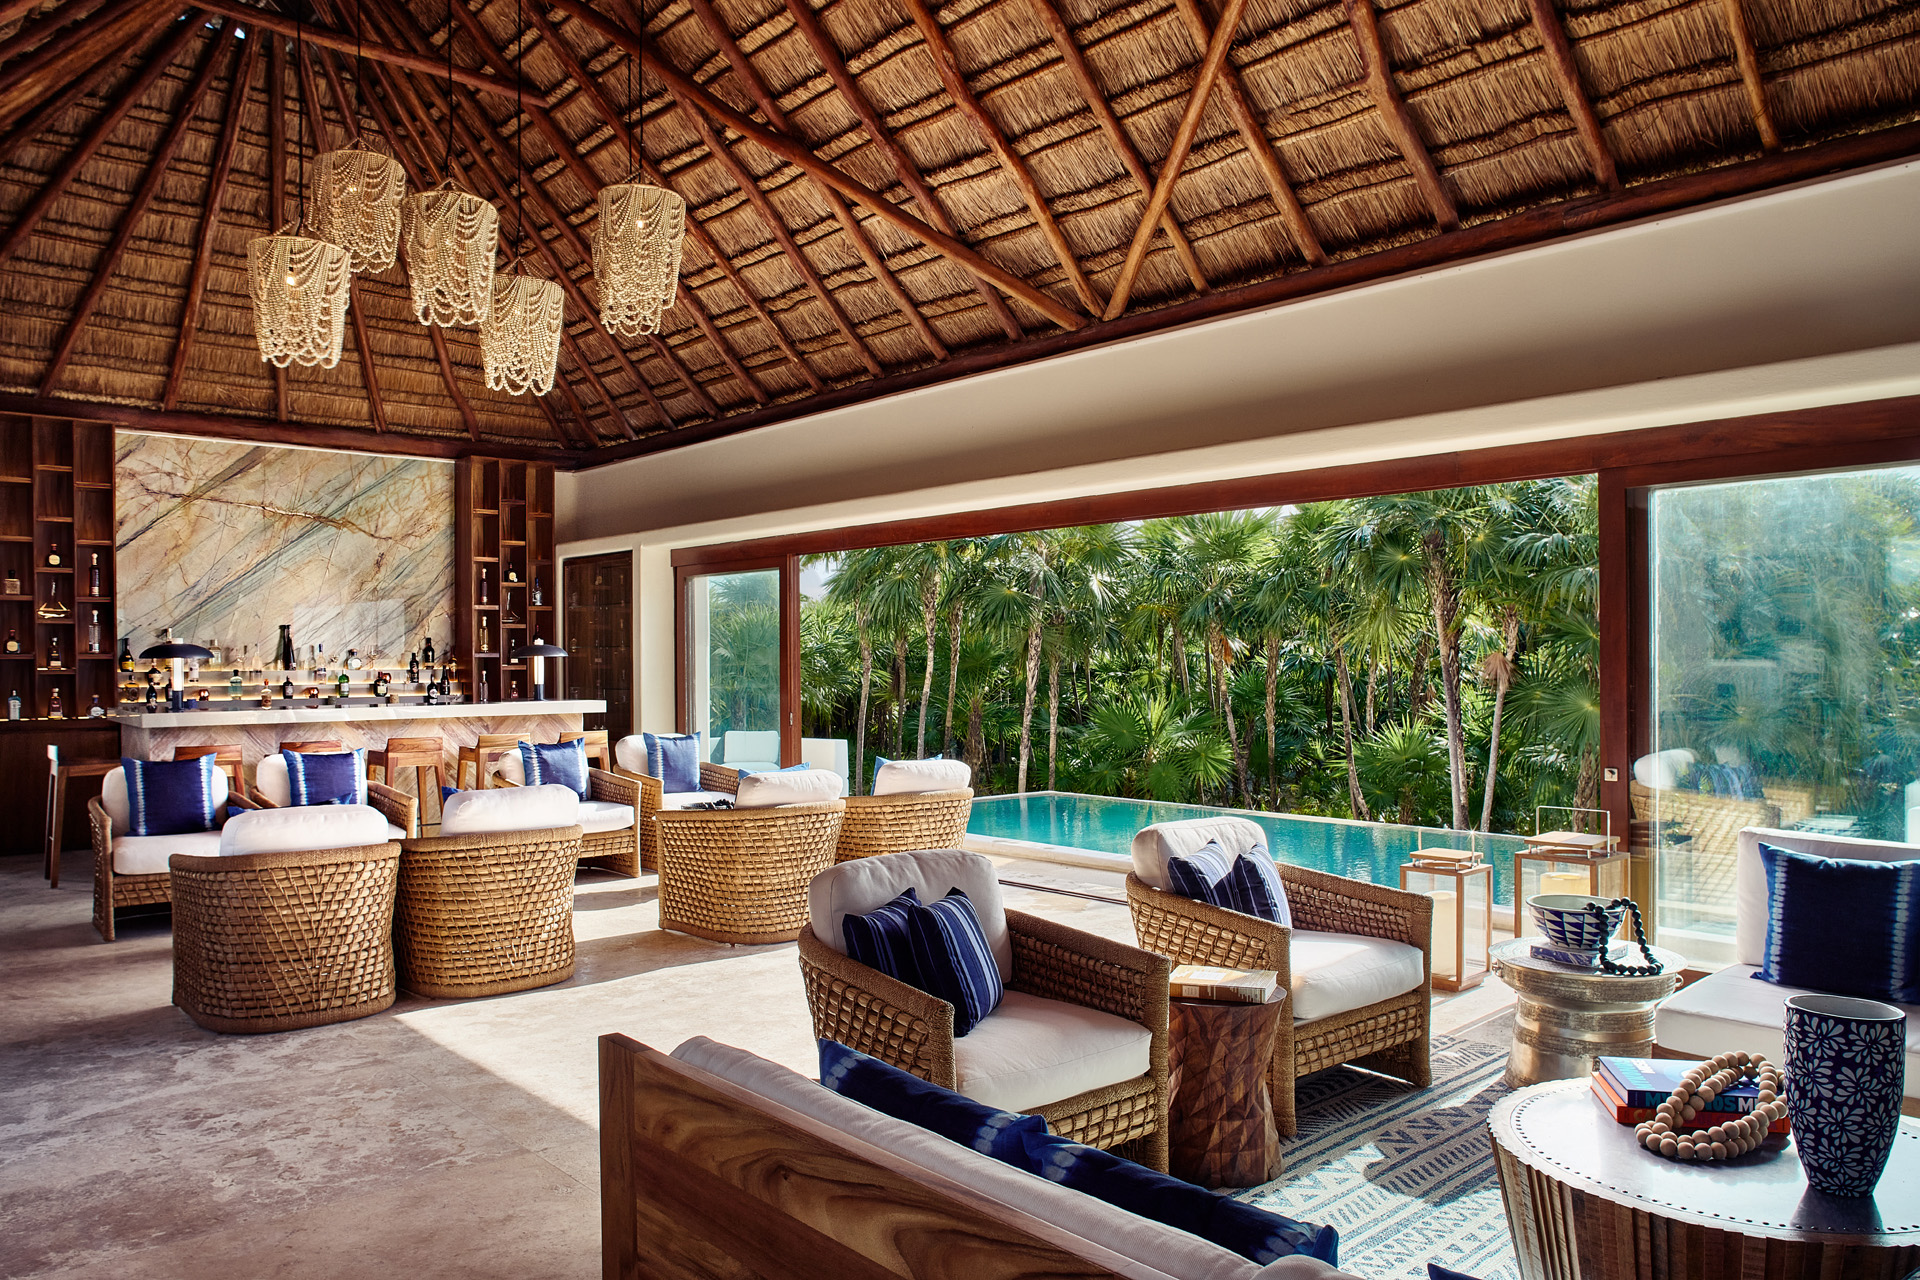 An airy sitting area at Casa Chable beside the pool